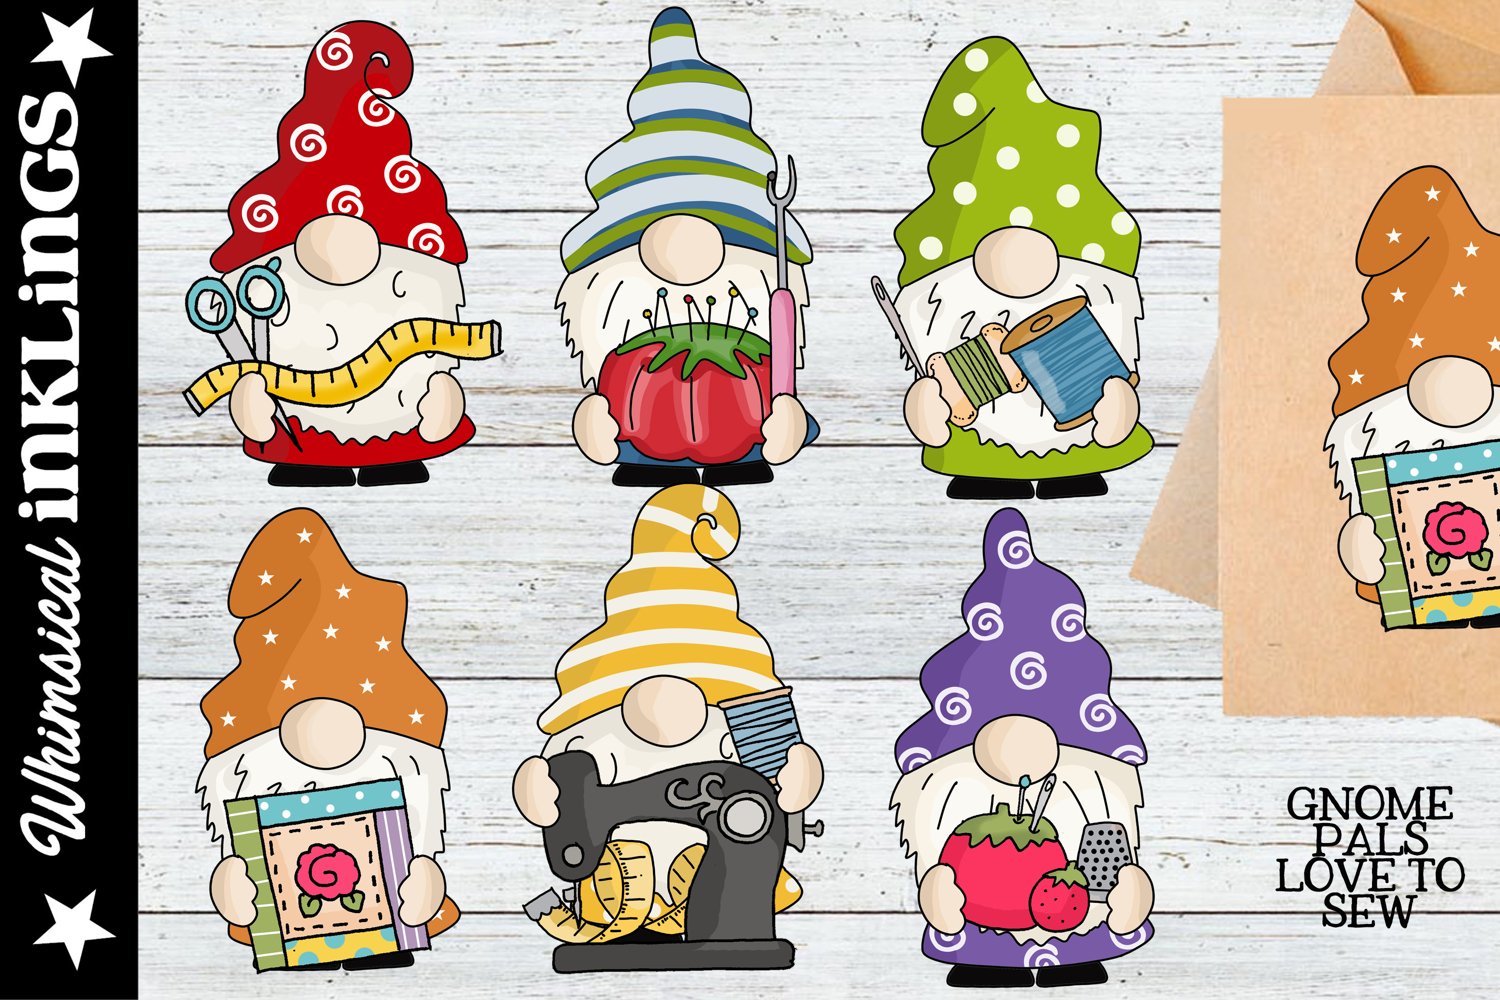 Gnome pals love to sew.